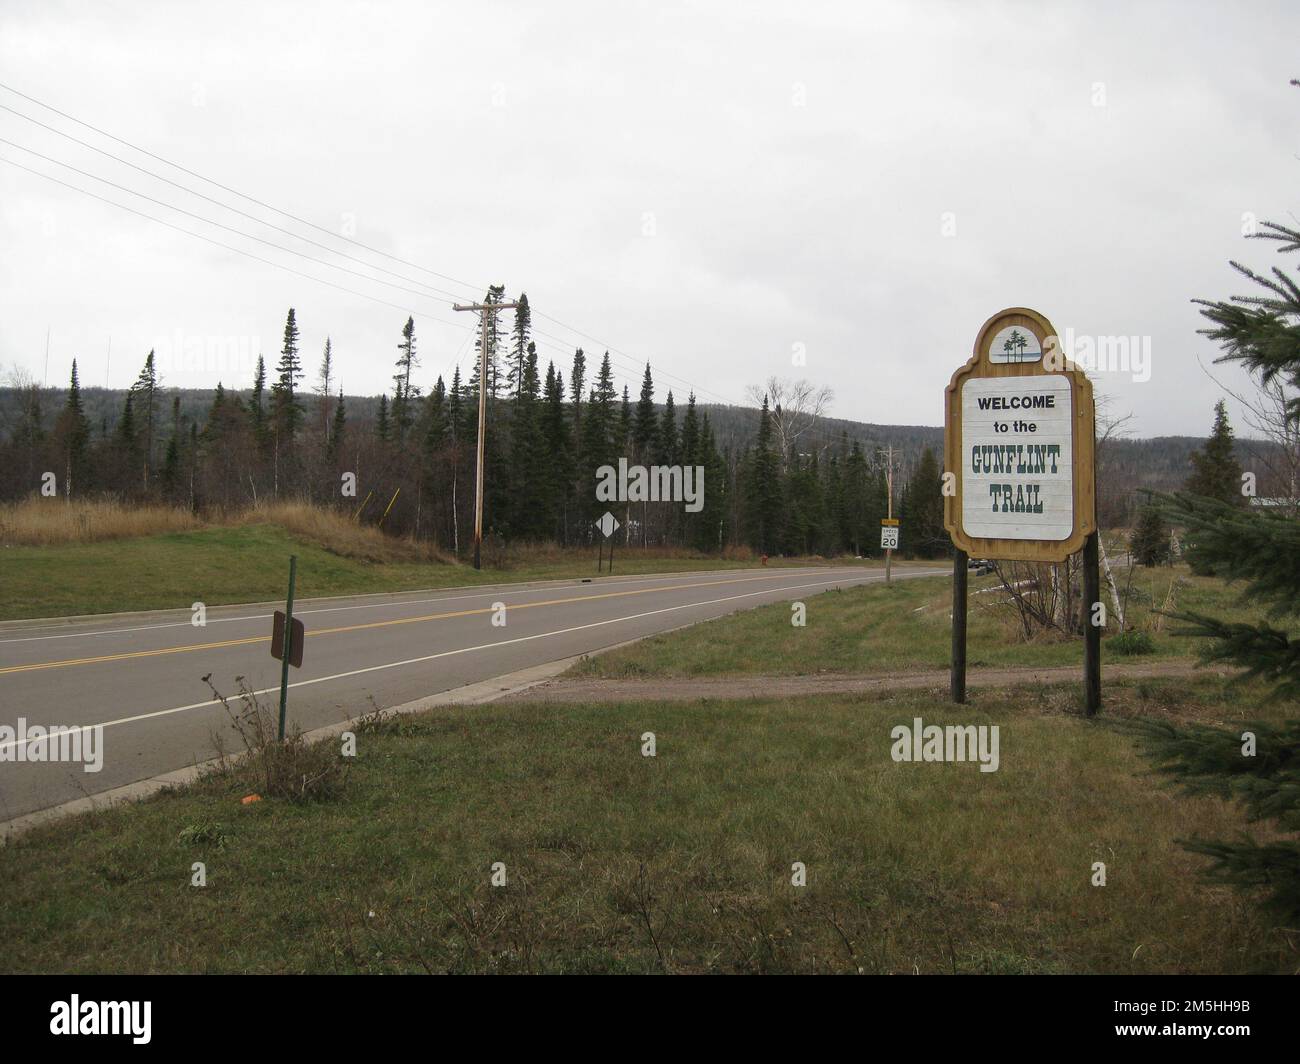 Gunflint Trail Scenic Byway - Gunflint Trail Welcome Sign. A large wooden sign found at the intersection of Highway 61 and the Gunflint Trail welcomes visitors to the byway. Minnesota (47.788° N 90.329° W) Stock Photo